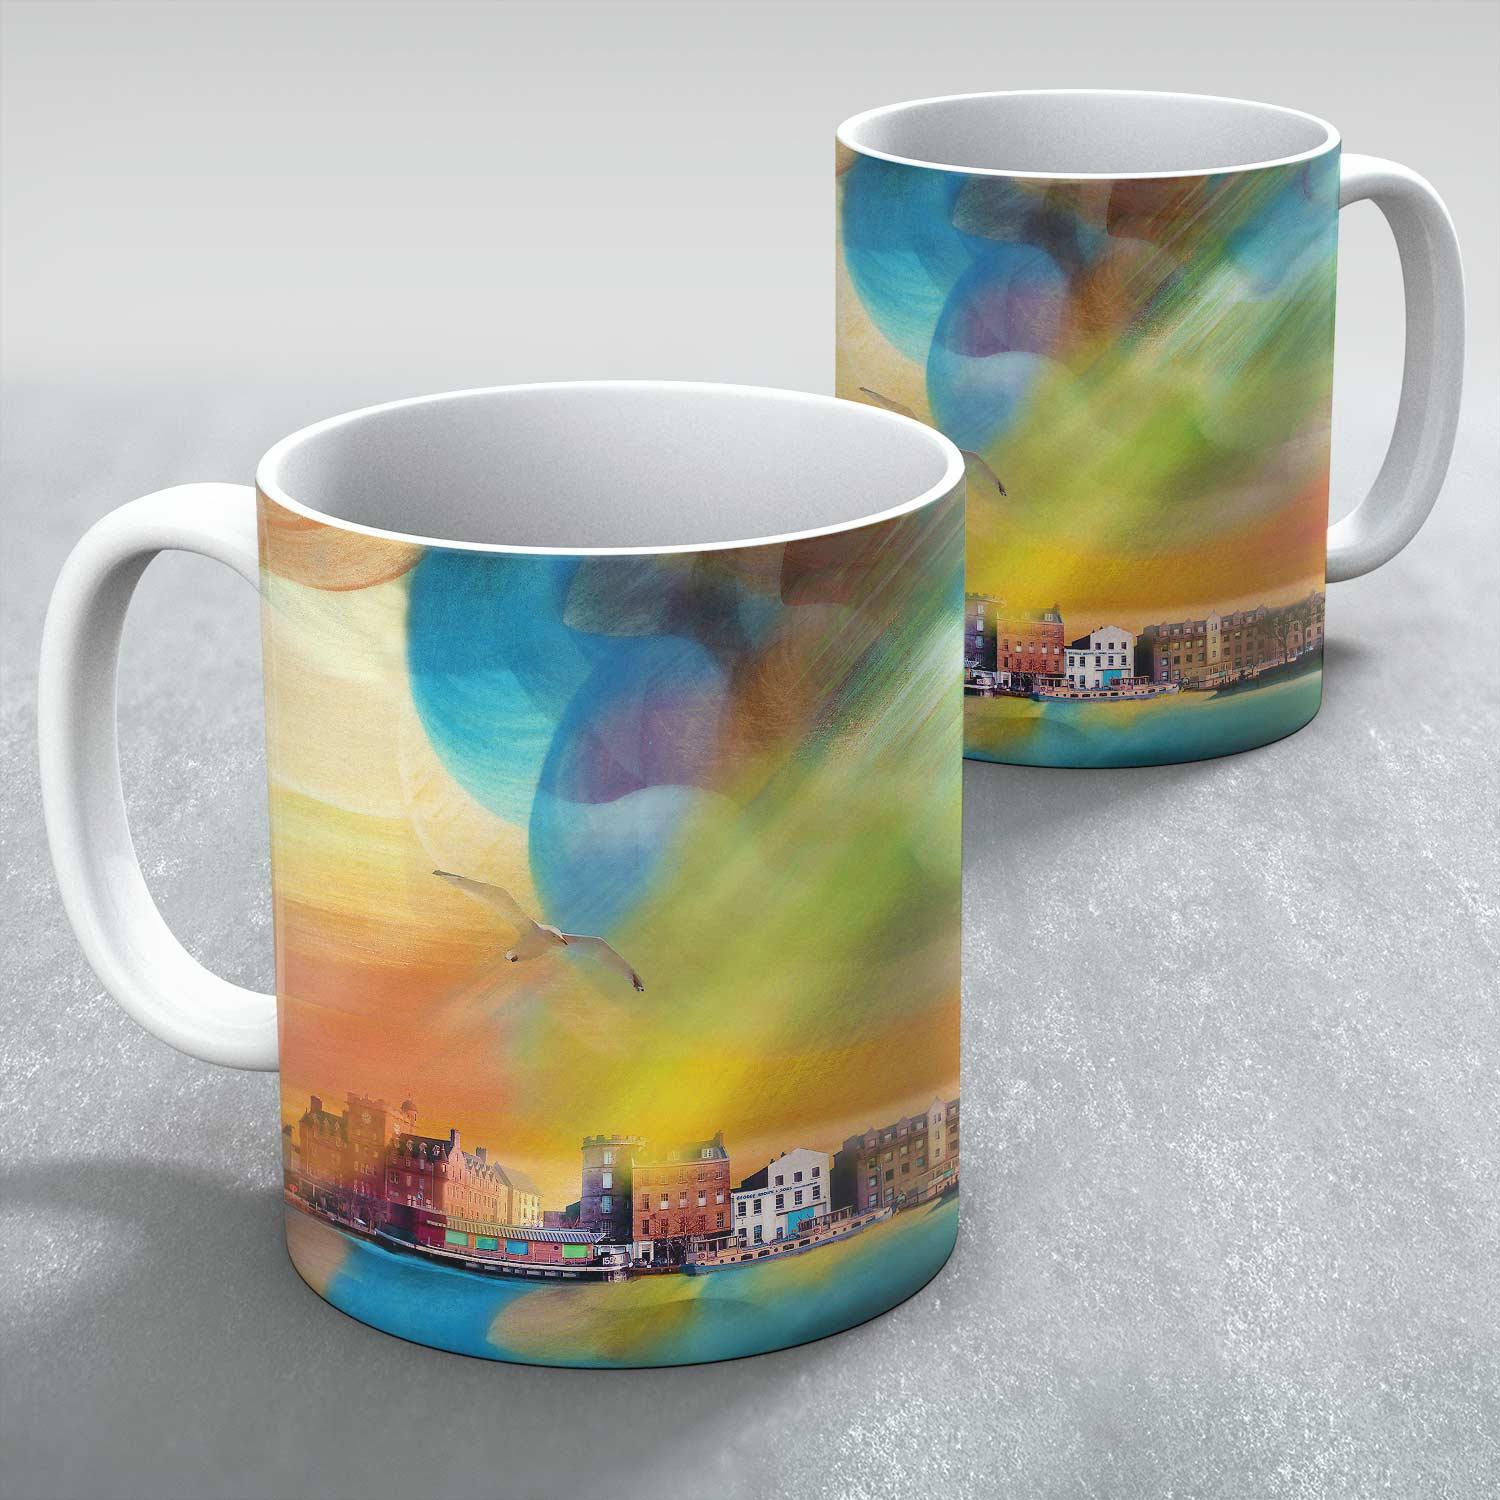 Sunshine on the Shore Mug from an original painting by artist Esther Cohen